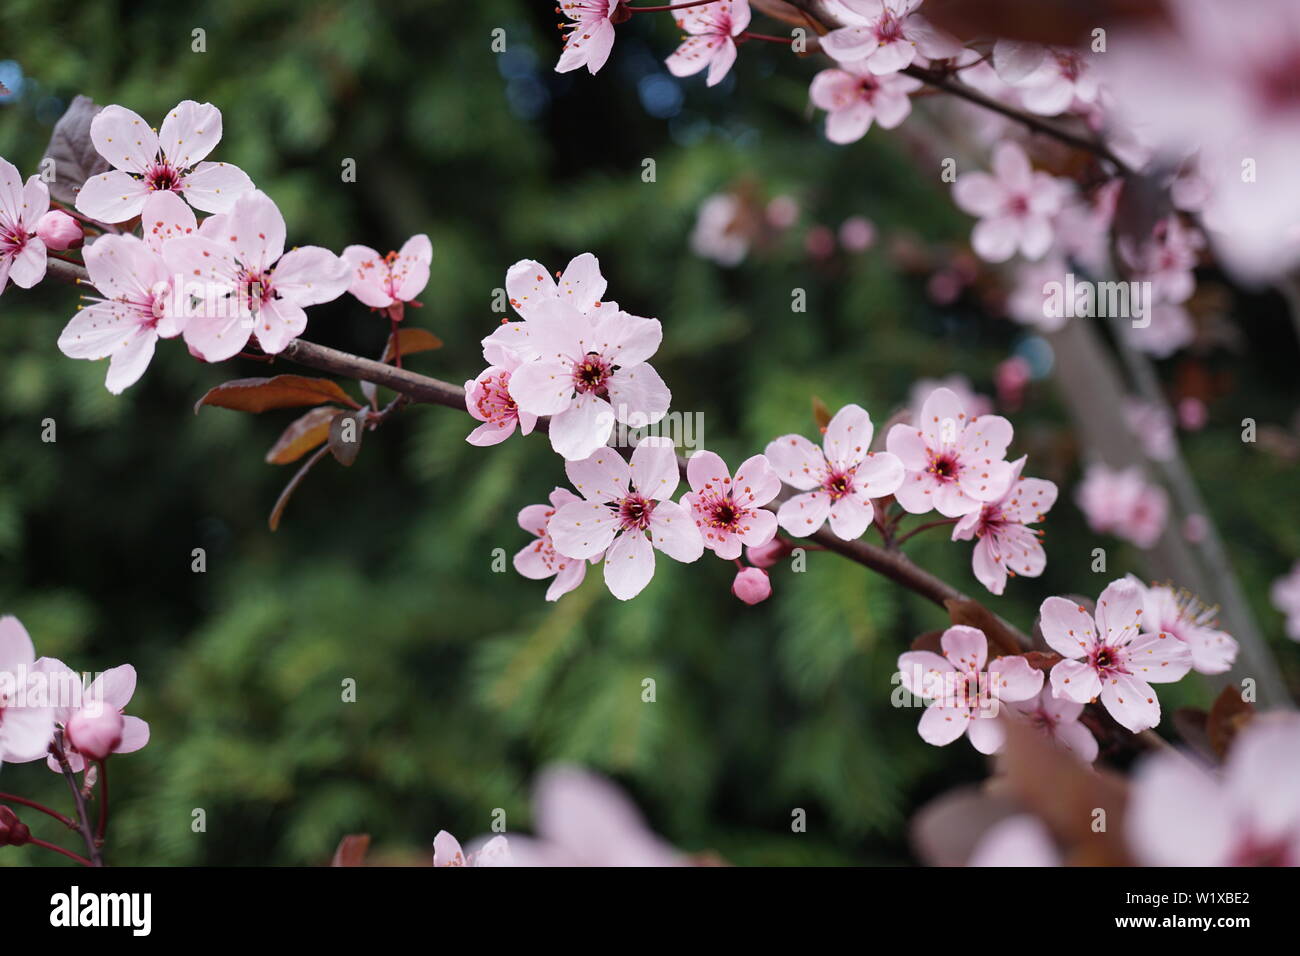 Springs beautiful cherry blossoms in warm and cold light Stock Photo